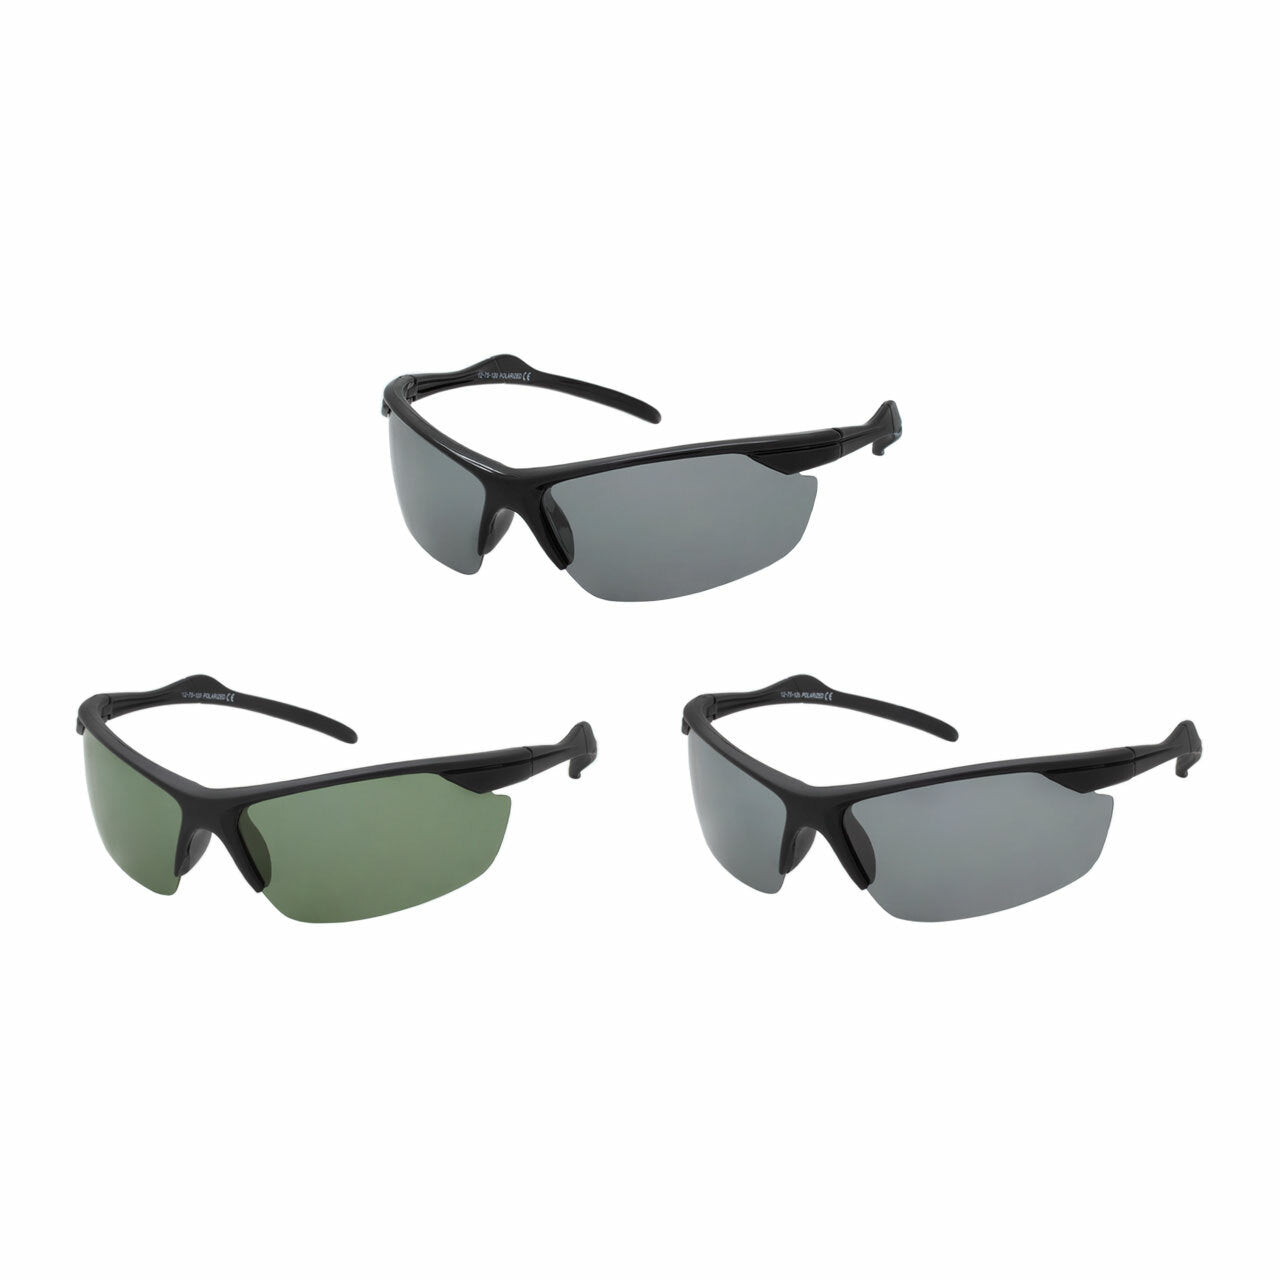 Assorted Color Polycarbonate Metal Assorted Style Sunglasses Cardboard 4 Panel Counter Display 48 Pieces  (Pack of Dozen)